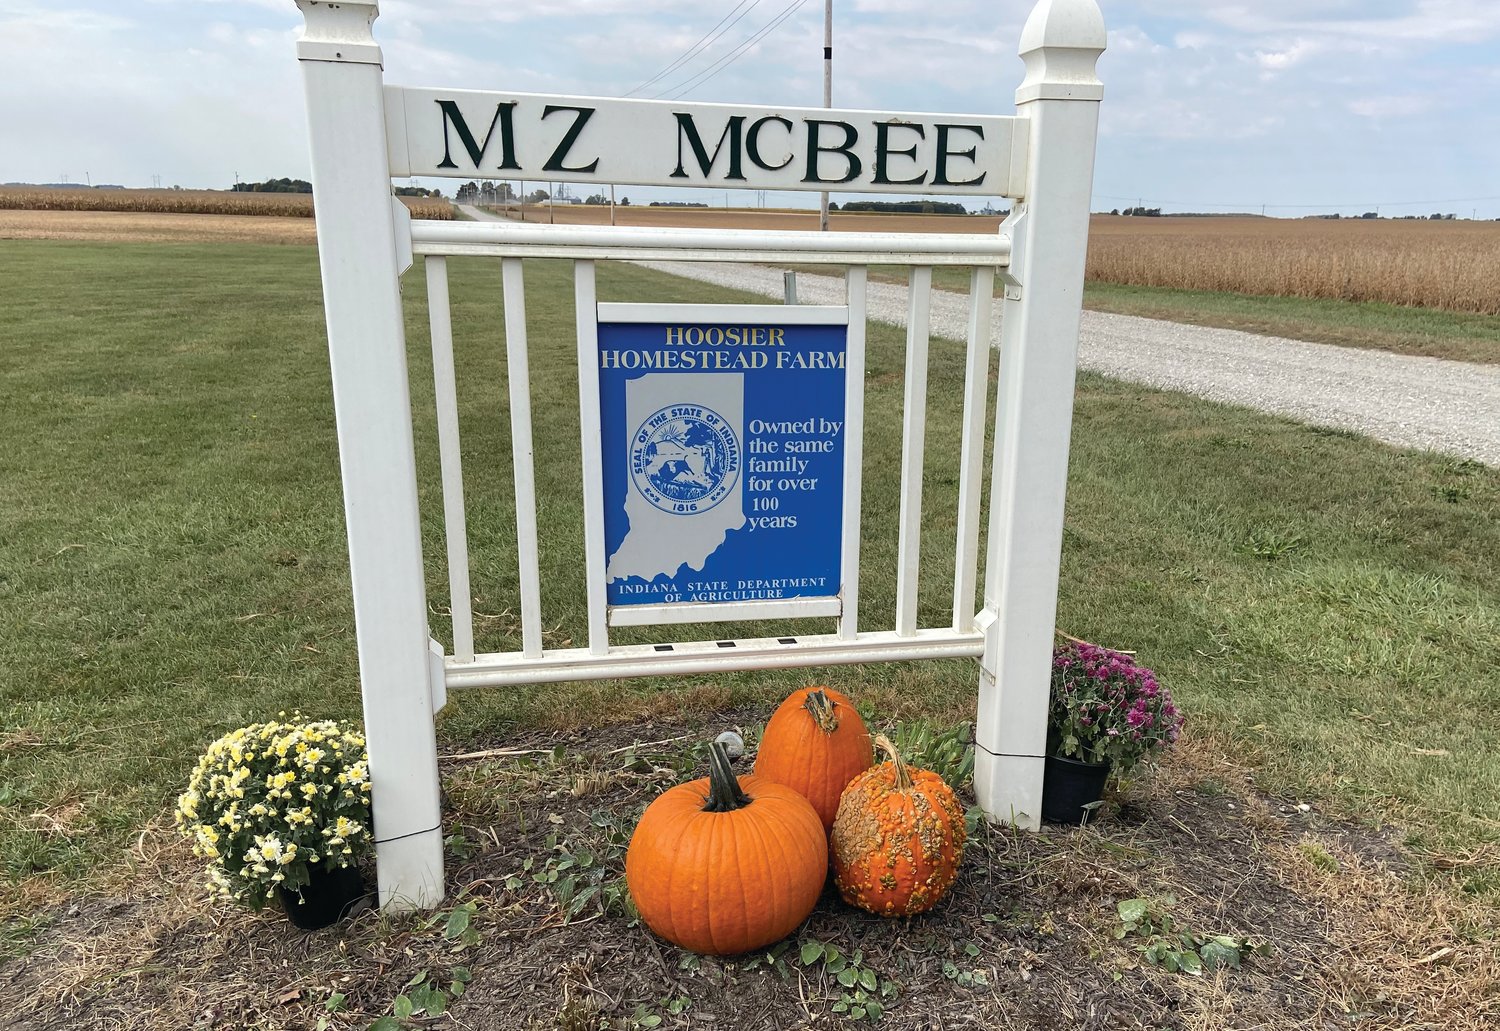 A commemorative sign awarded by the state of Indiana recognizes the heritage of the McBee Farm.